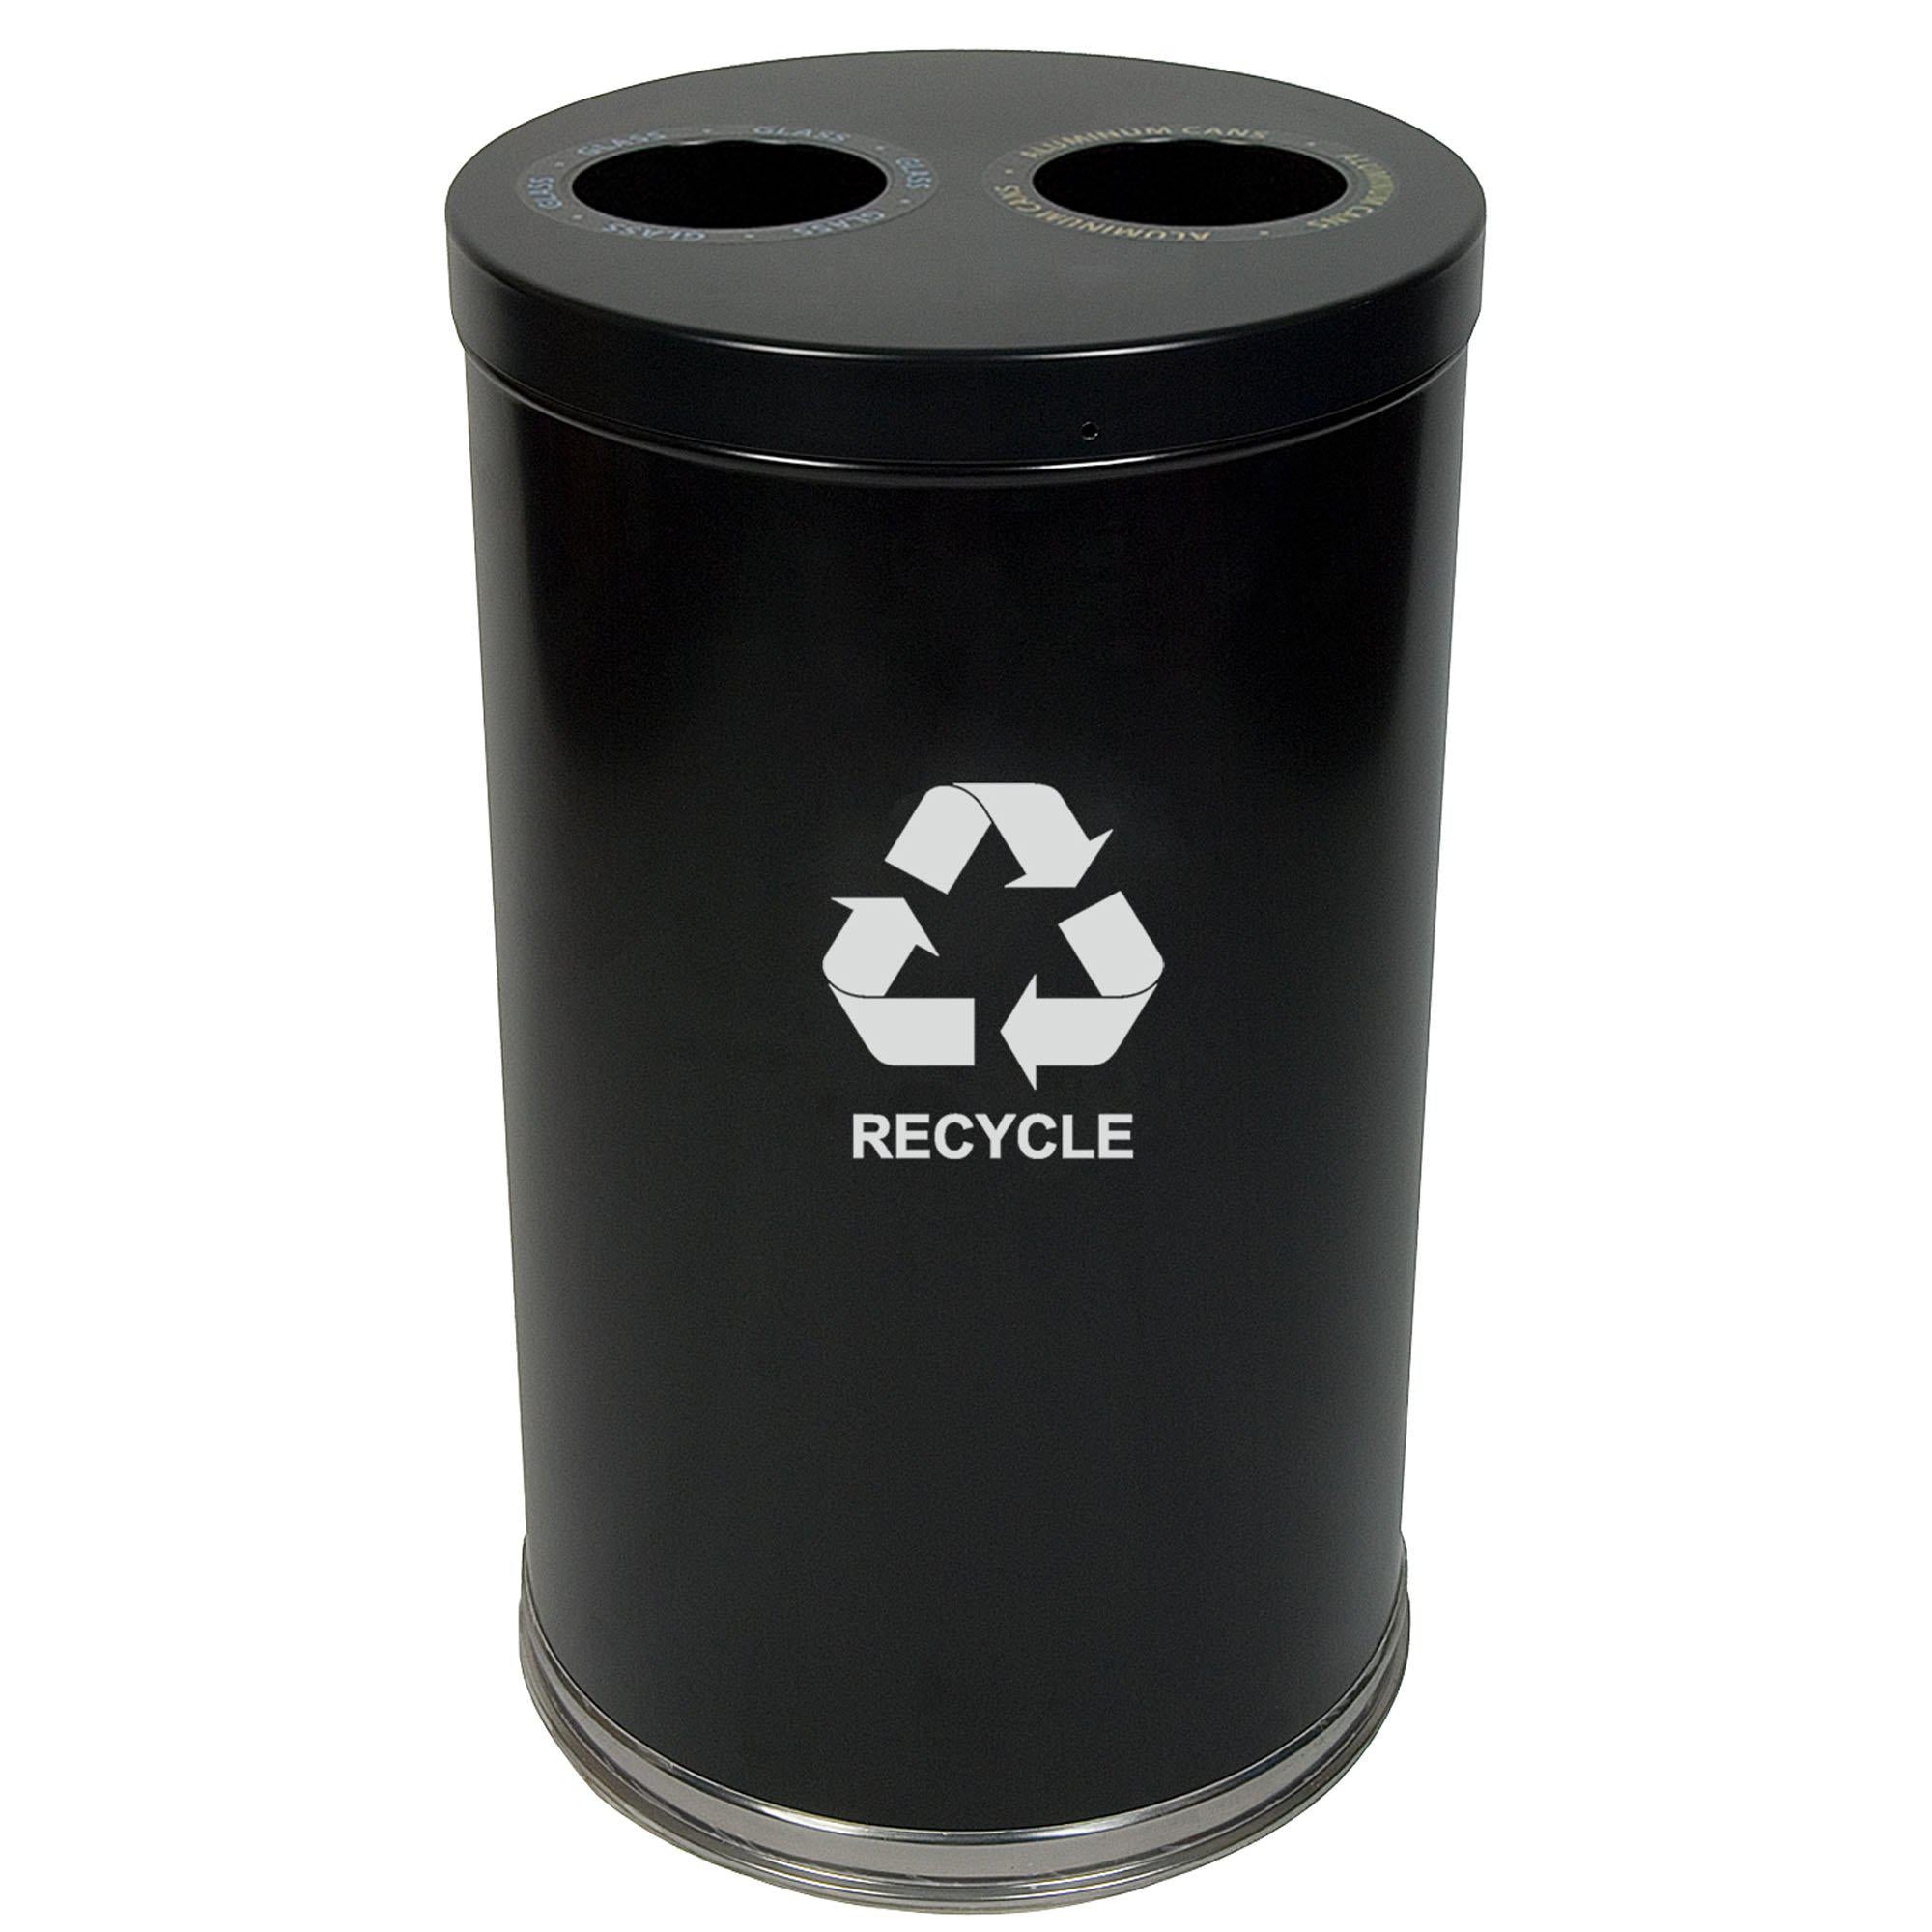 Emoti-Can Indoor Recycling Container, Two Openings, 20-Gallon Capacity